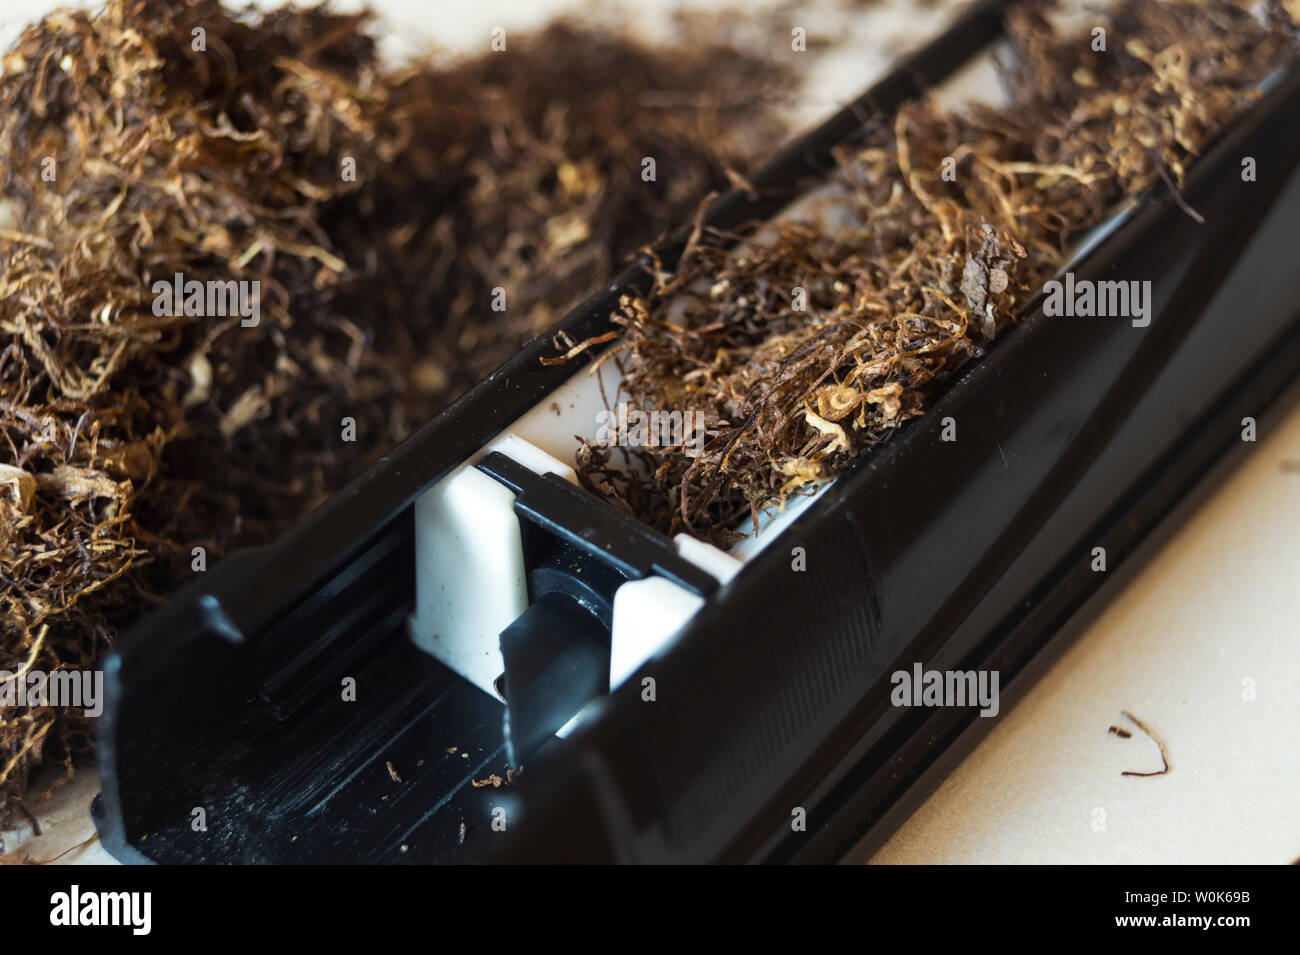 machine for stuffing cigarettes with tobacco, close up Stock Photo